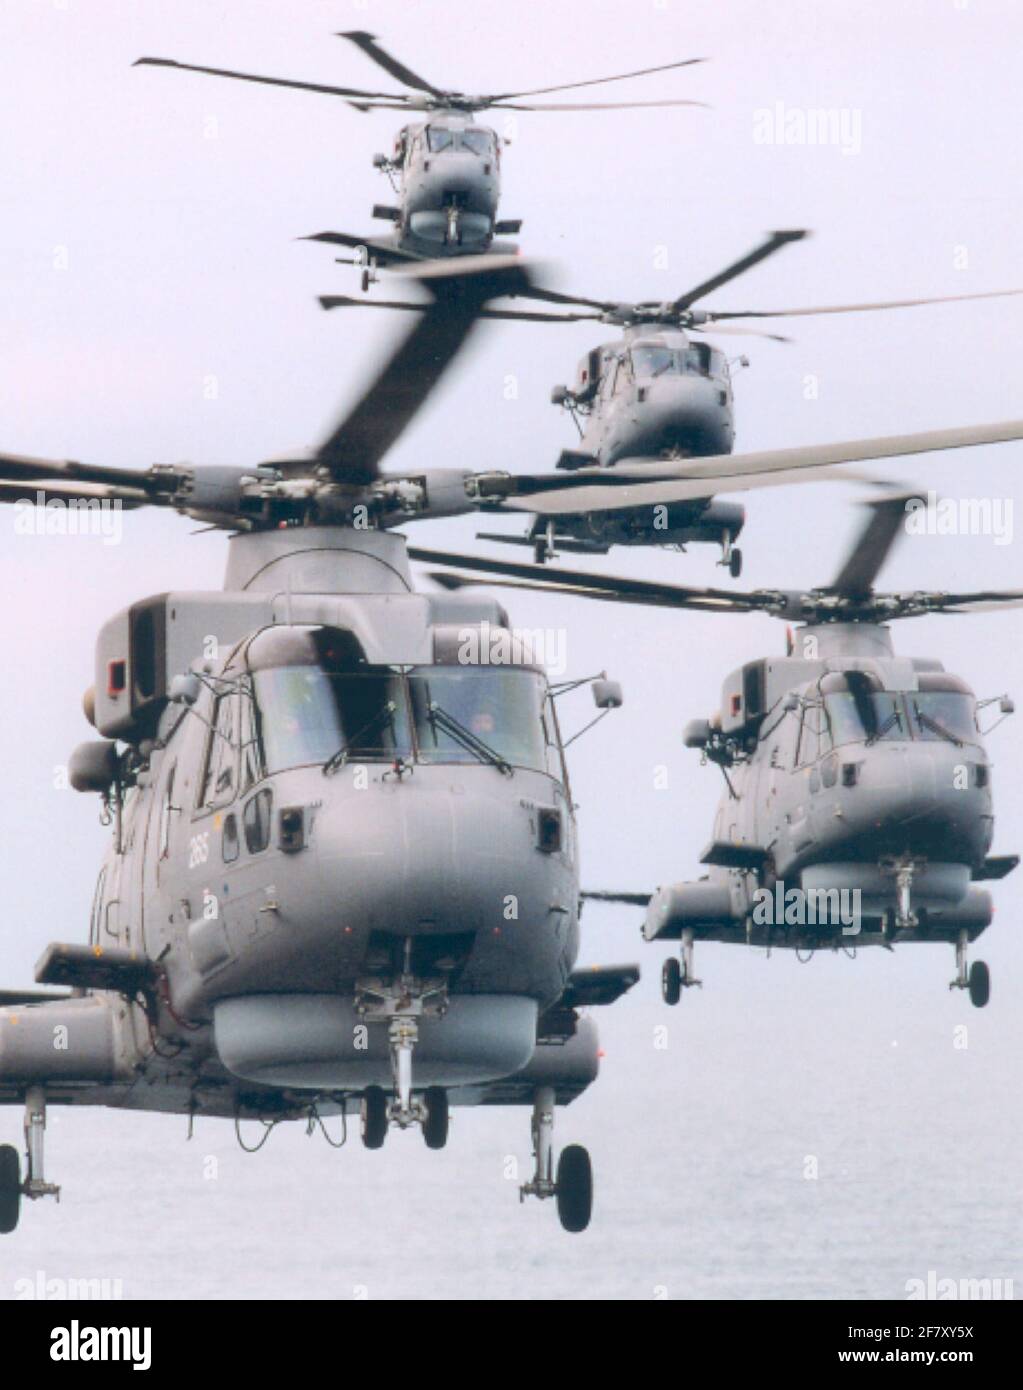 MERLIN HELICOPTERS FROM THE CARRIER ARK ROYAL. PIC MIKE WALKER 2002 Stock Photo